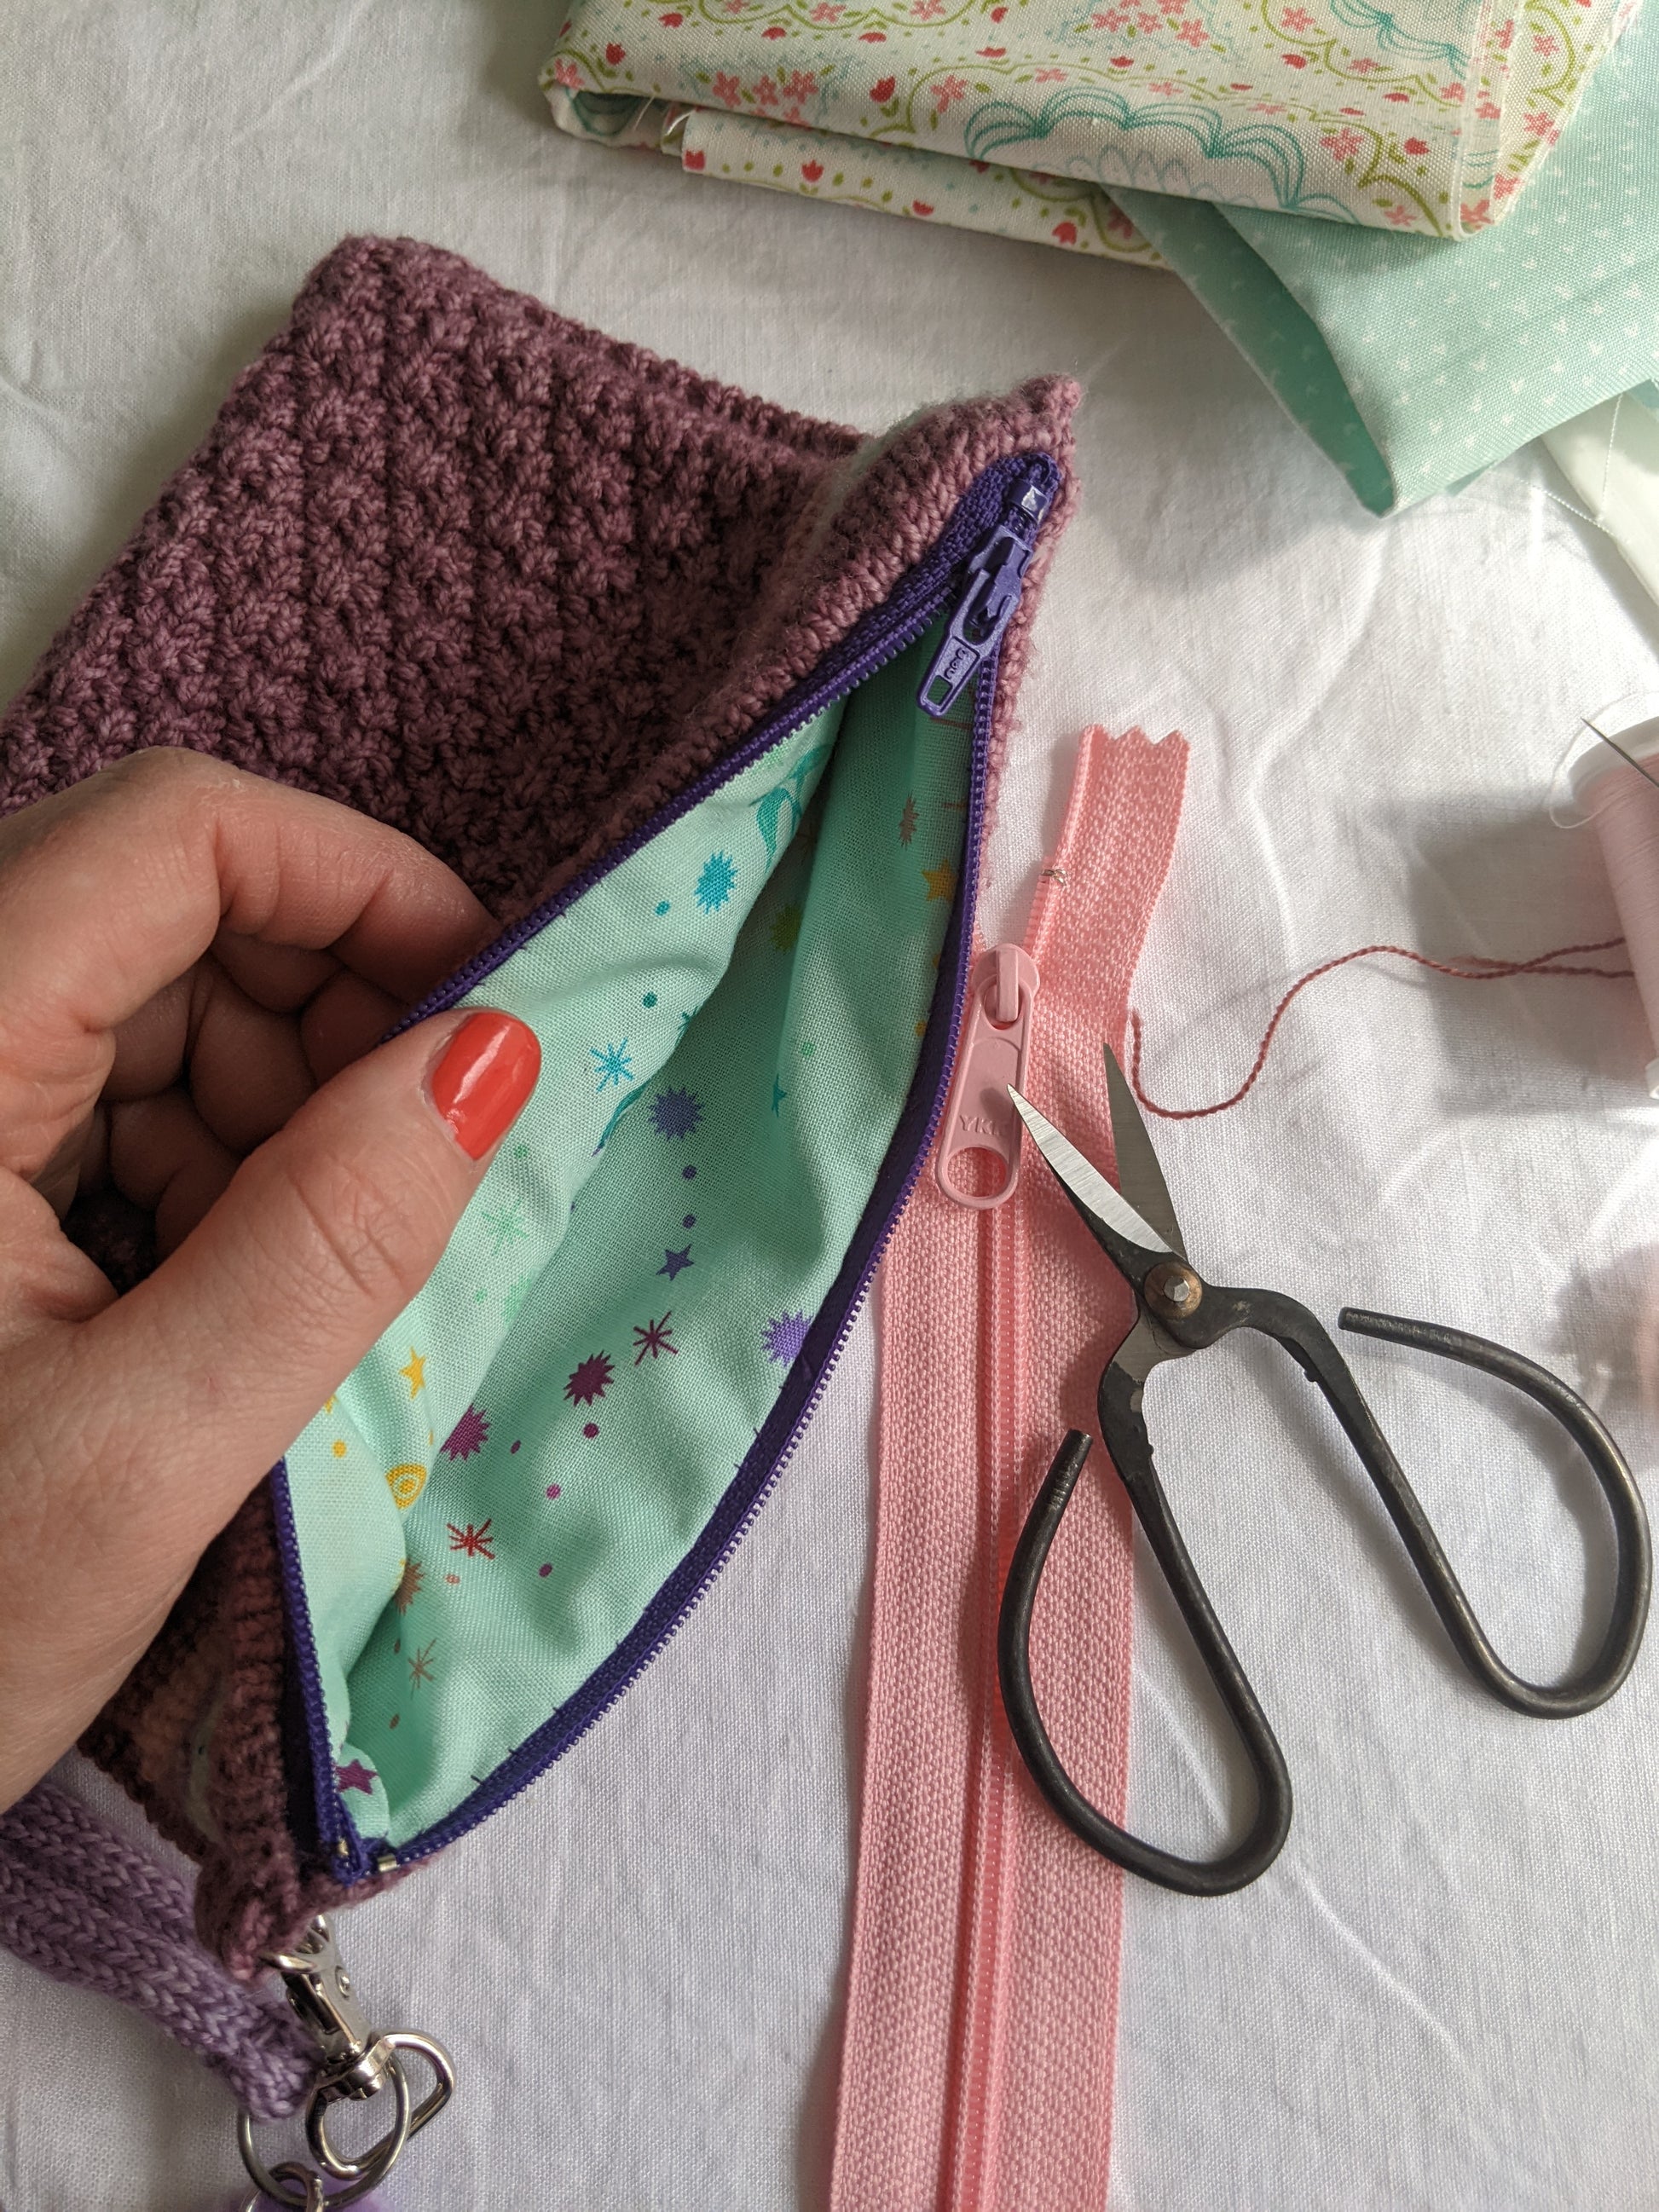 Jen's hand holds open a knit notions pouch, which lies on a table next to sewing scissors, extra zippers, and fabric. The inside of the pouch is lined with blue fabric.